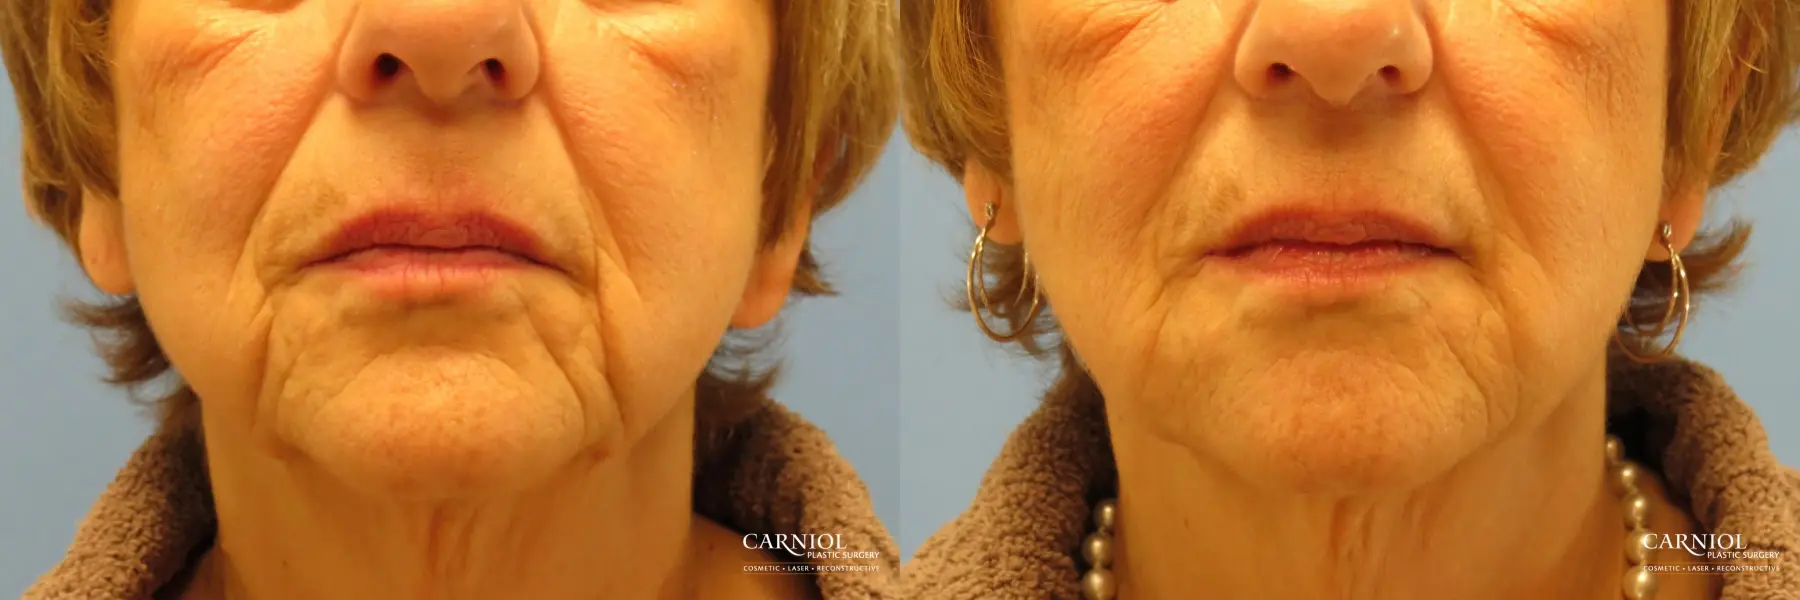 Non-Surgical Facelift: Patient 1 - Before and After 1